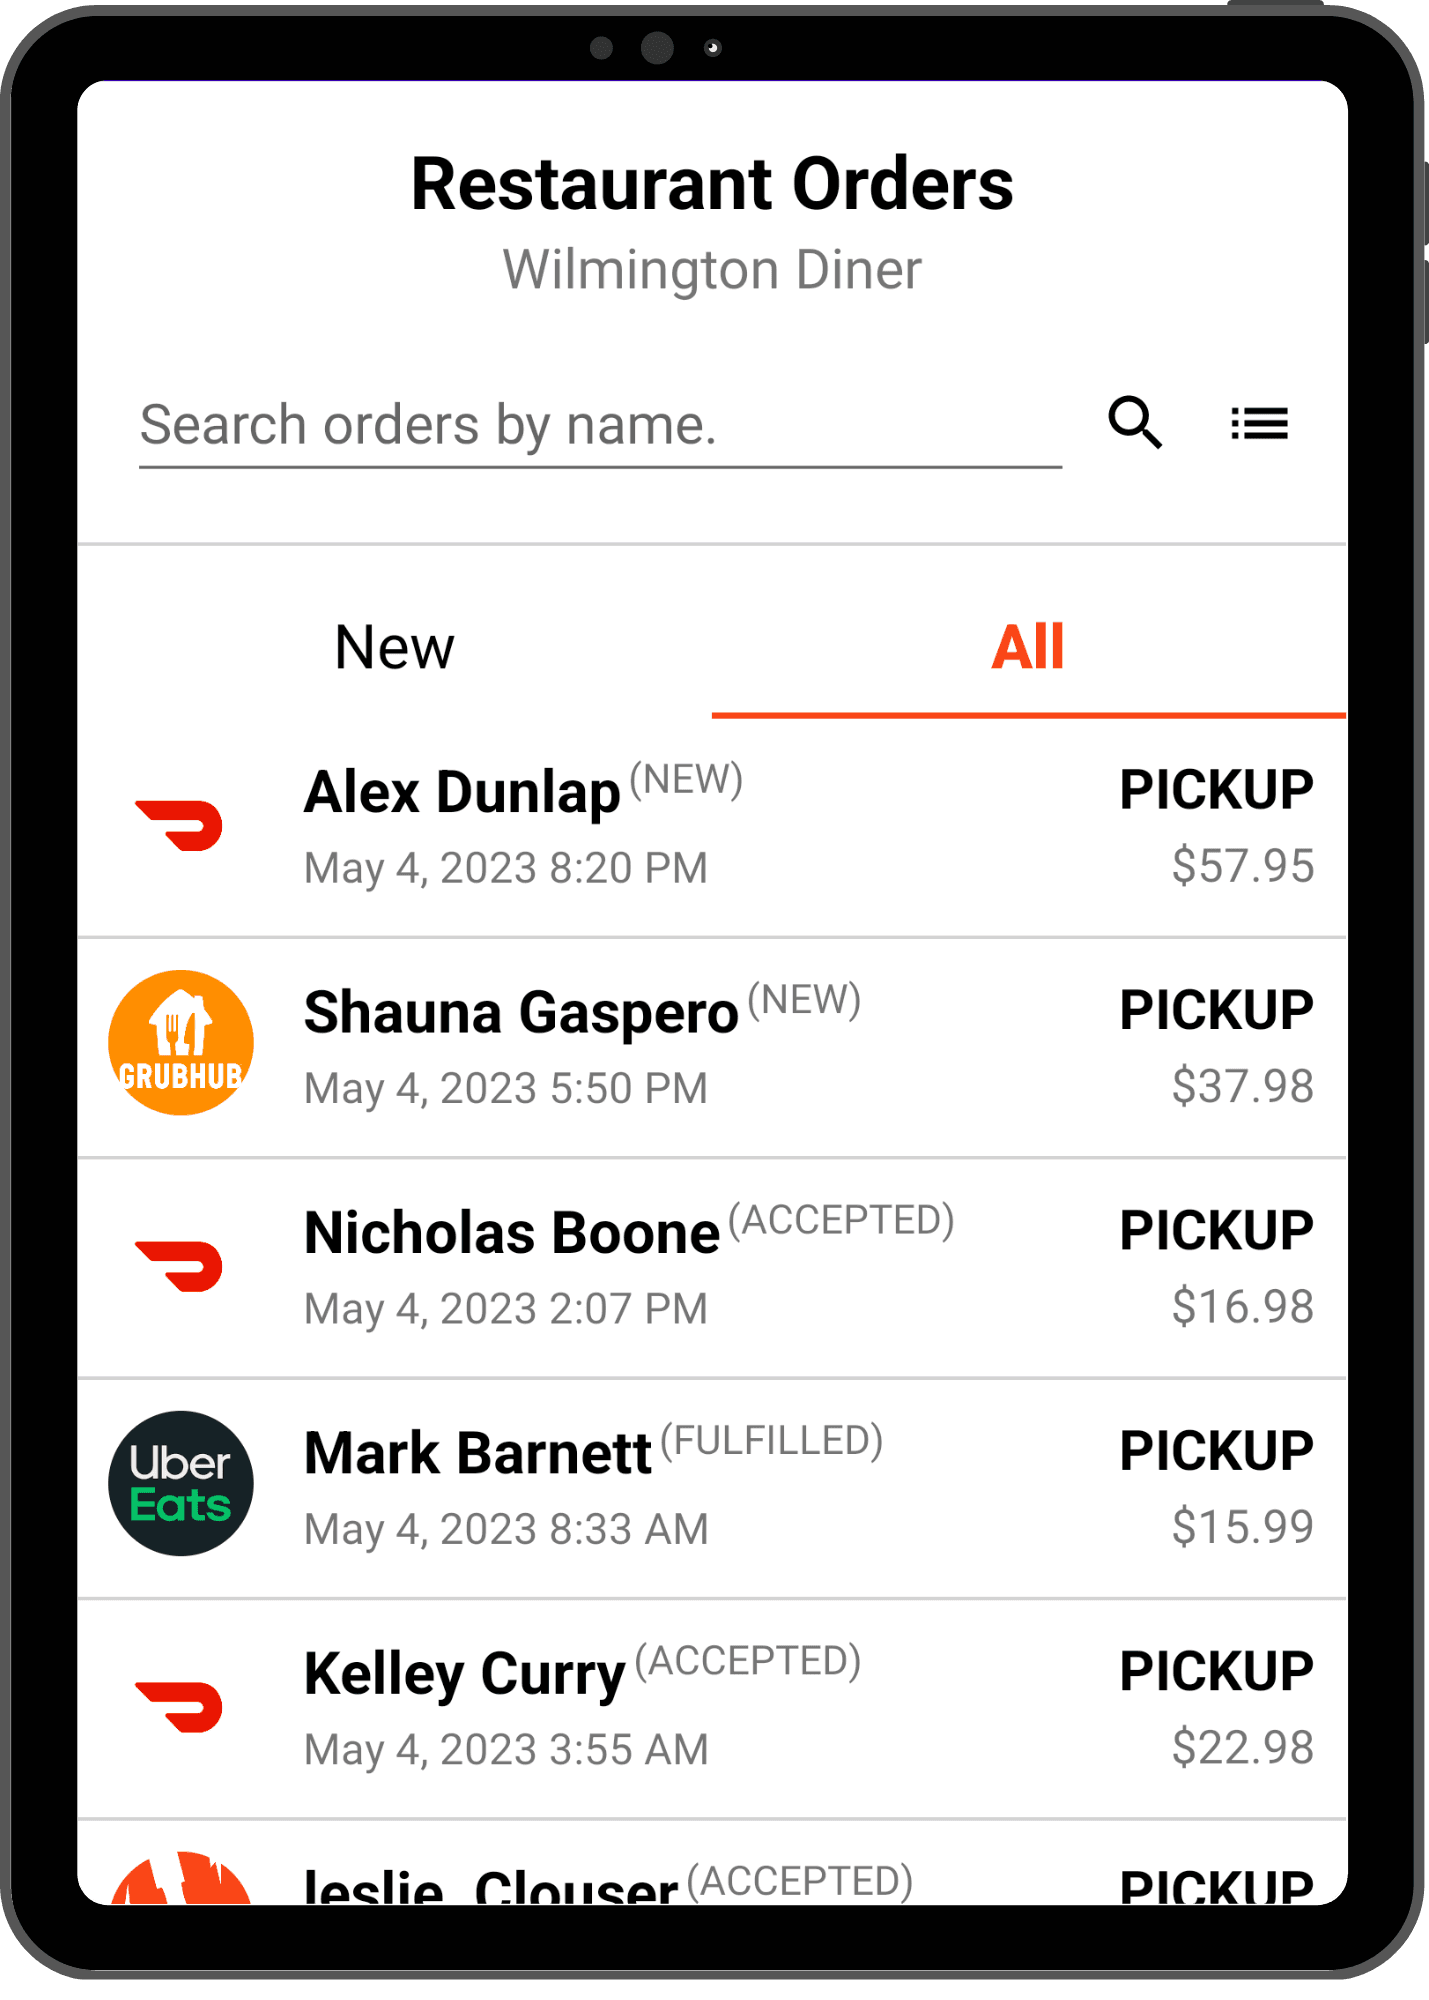 Dinevate Order Manager app showing orders from different food order apps like Dinevate, Doordash, Grubhub and UberEats. They users are able to see the orders from different providers on the same tablet.